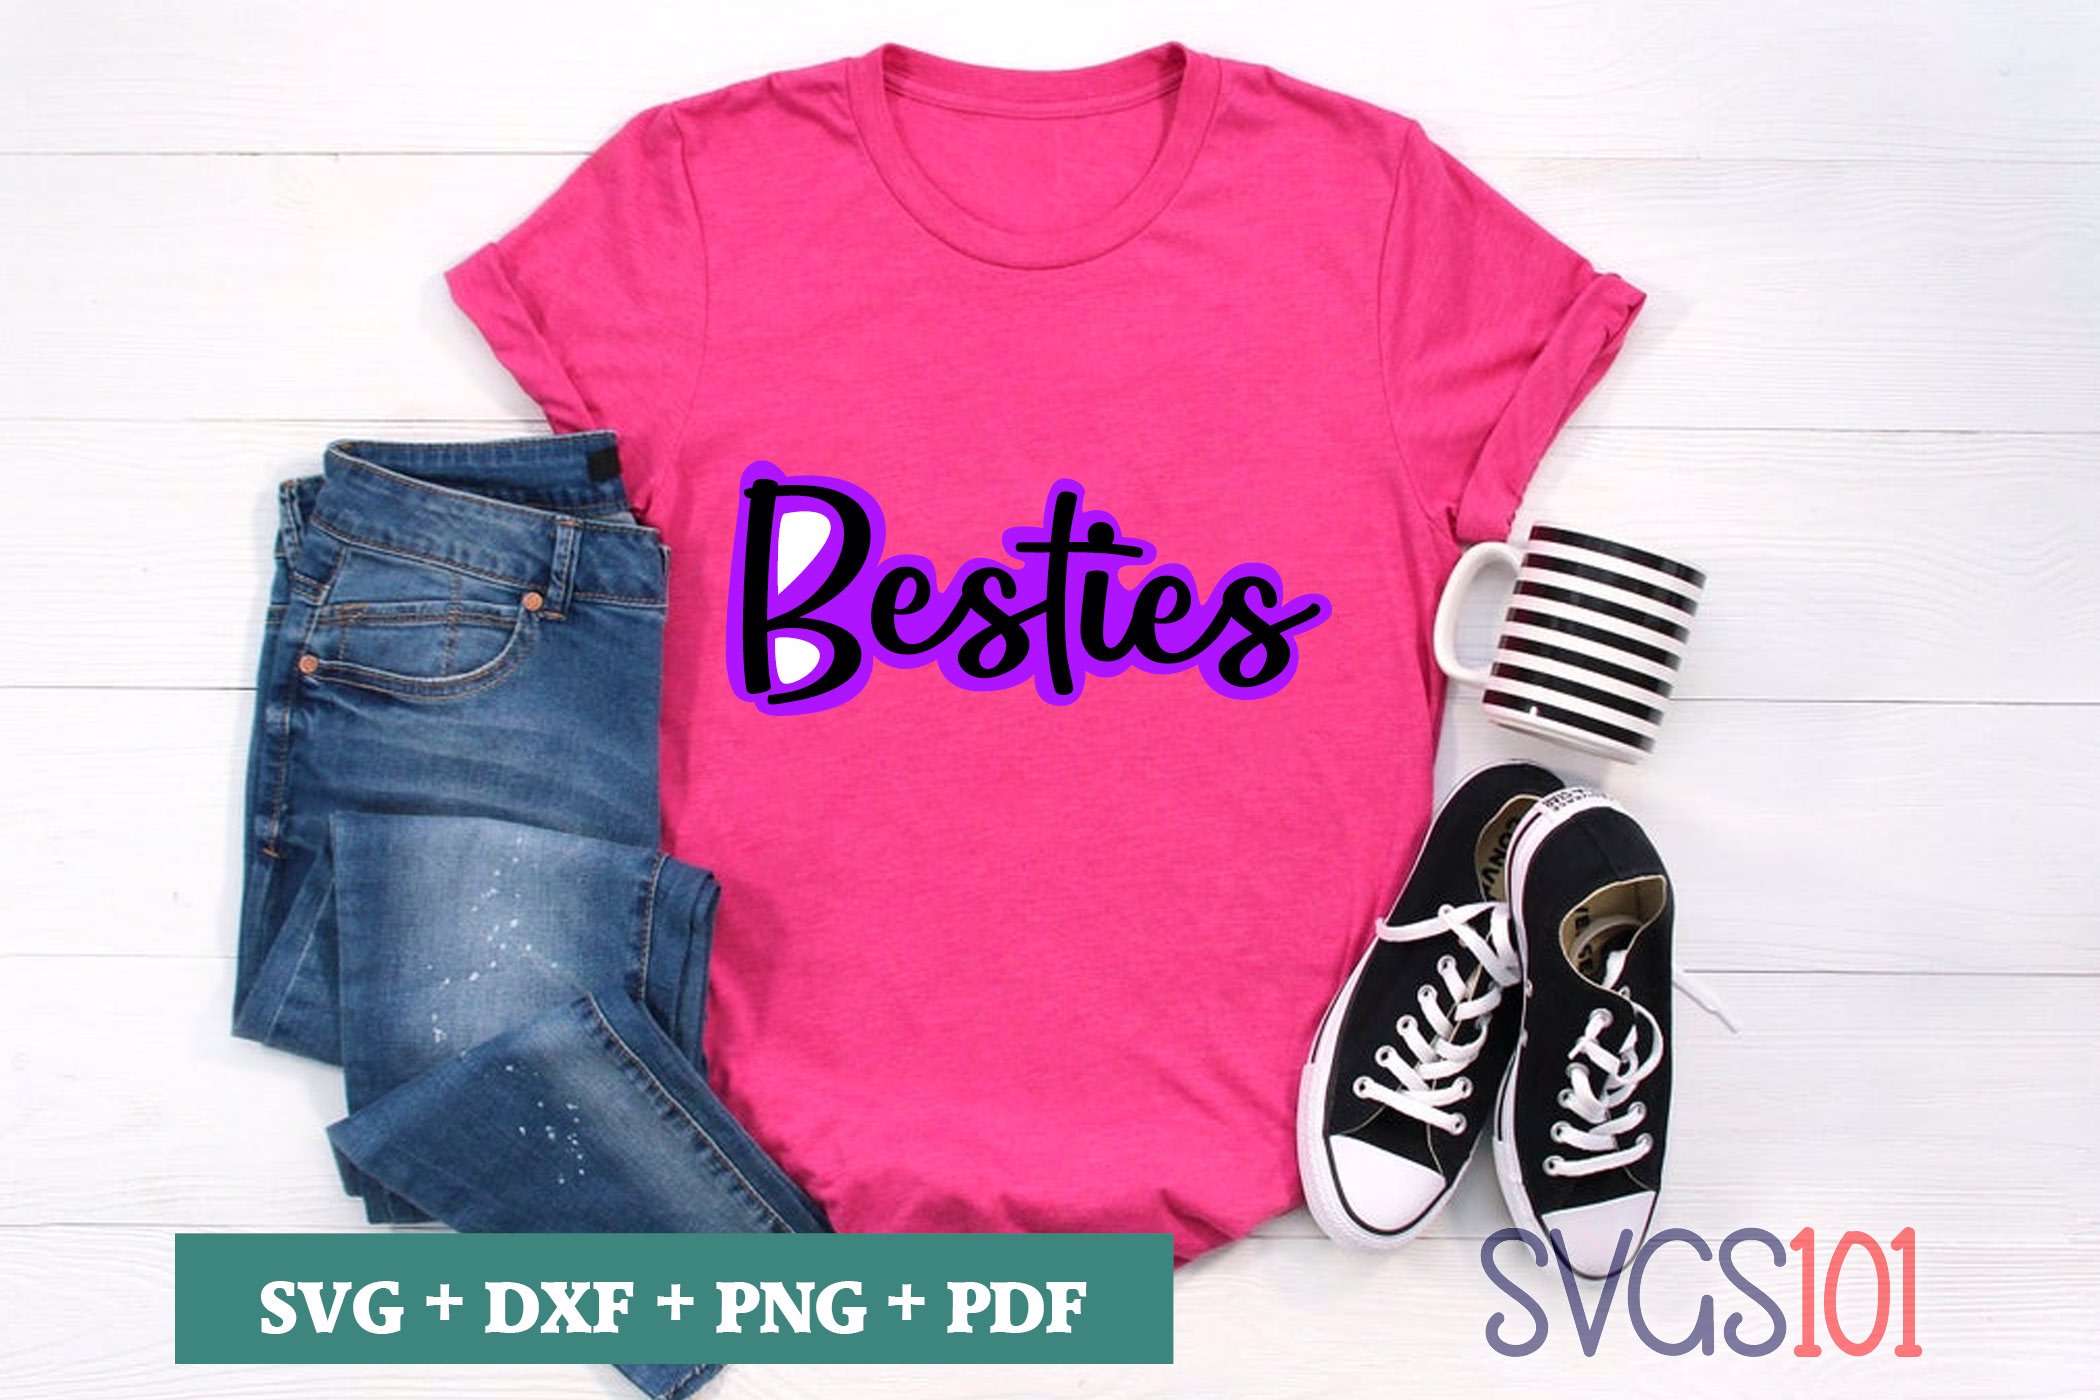 Download Besties SVG Cuttable file - DXF, EPS, PNG, PDF | SVG ...